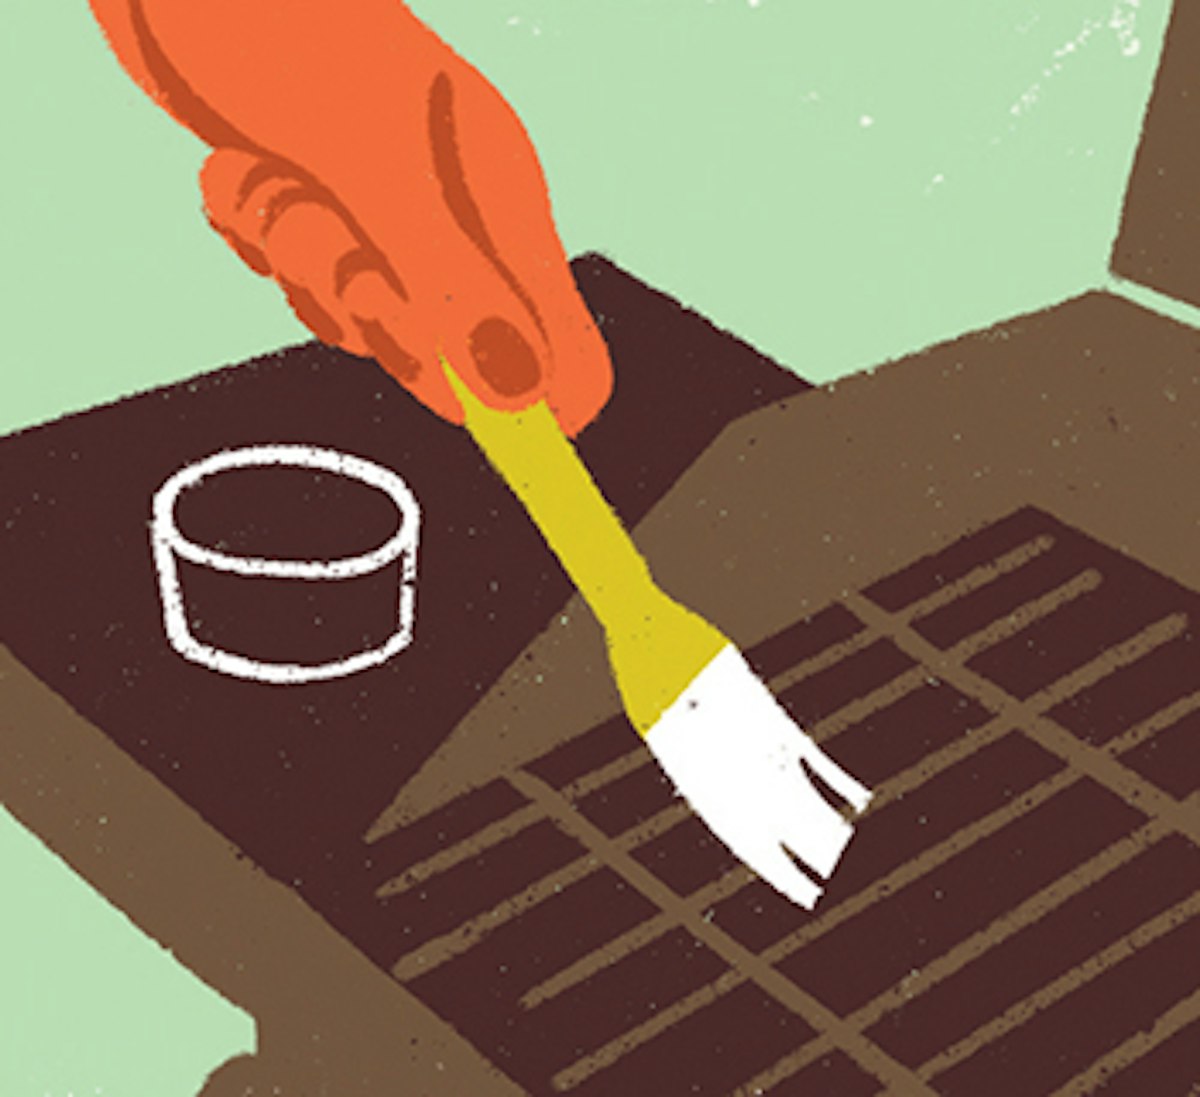 An illustration of a person using a brush to clean a grill.